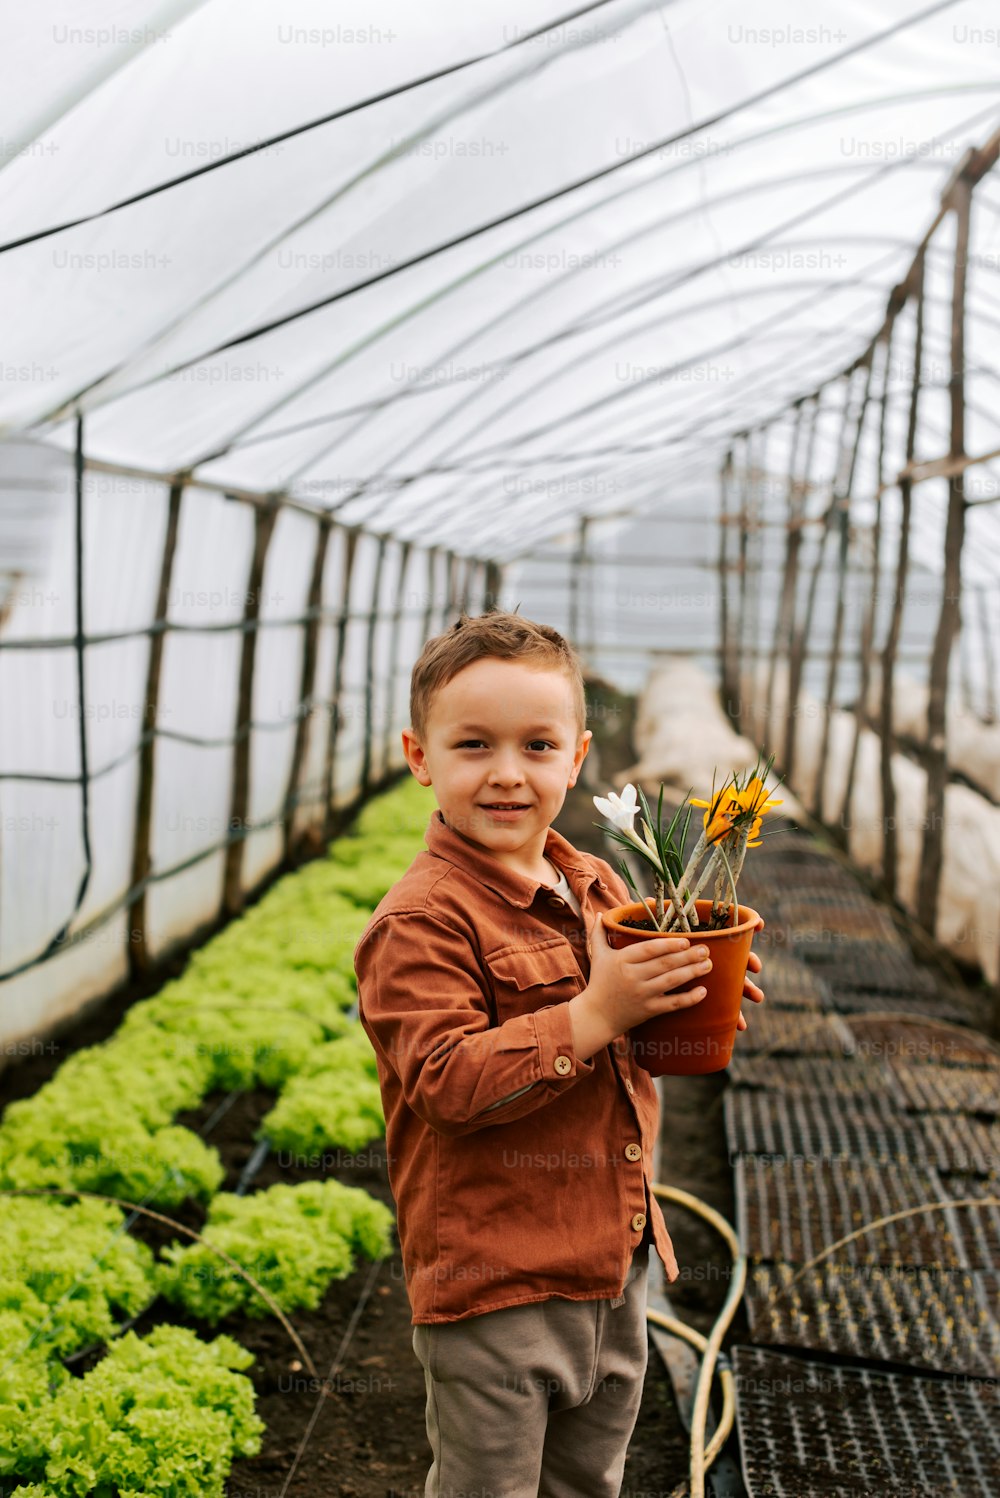 a young boy holding a potted plant in a greenhouse